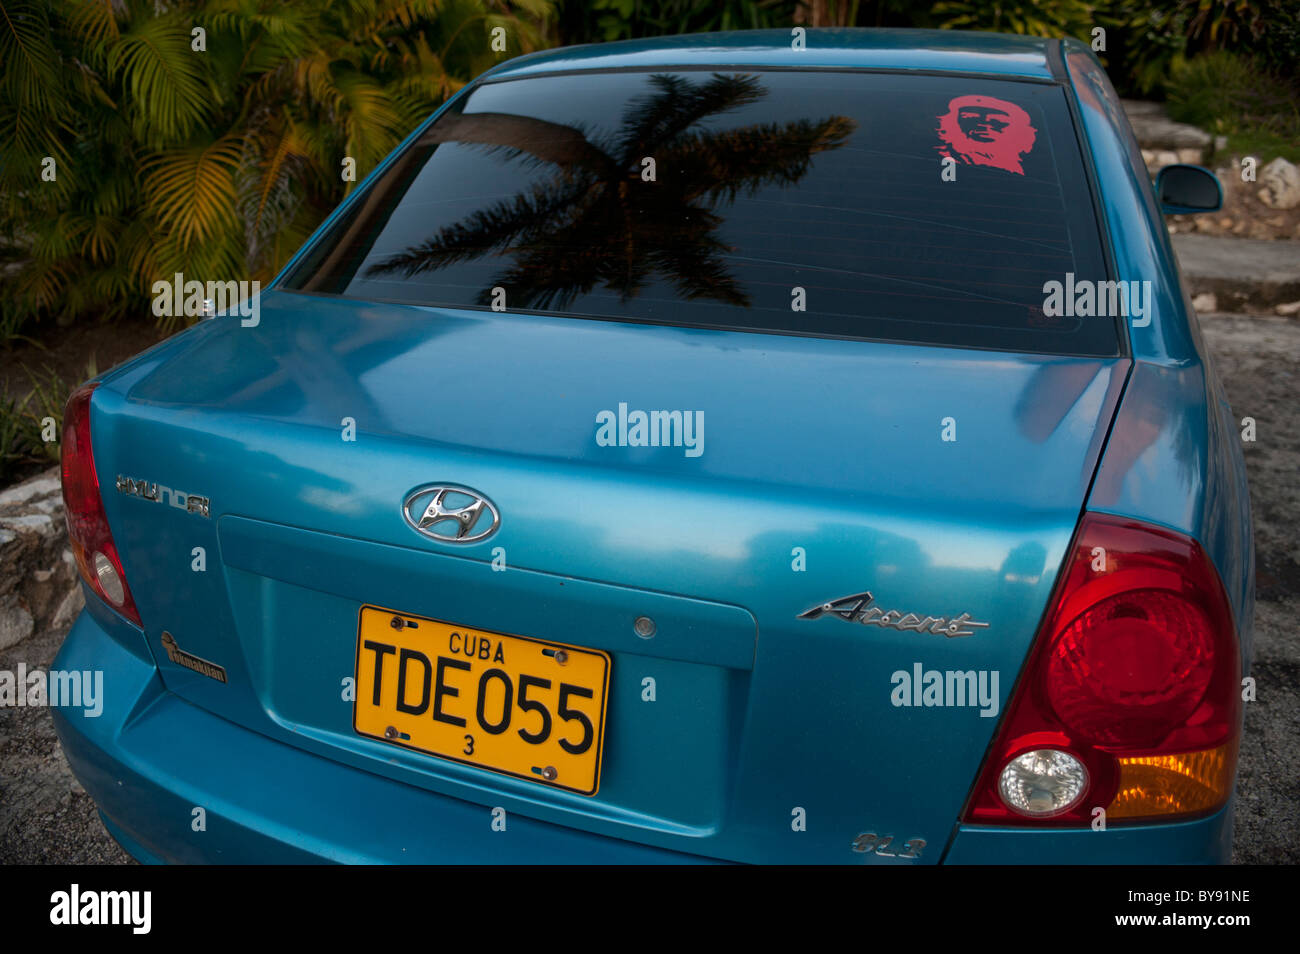 Blue Honda accent in Cuba with che Guevarra sticker and palmtree reflection Stock Photo